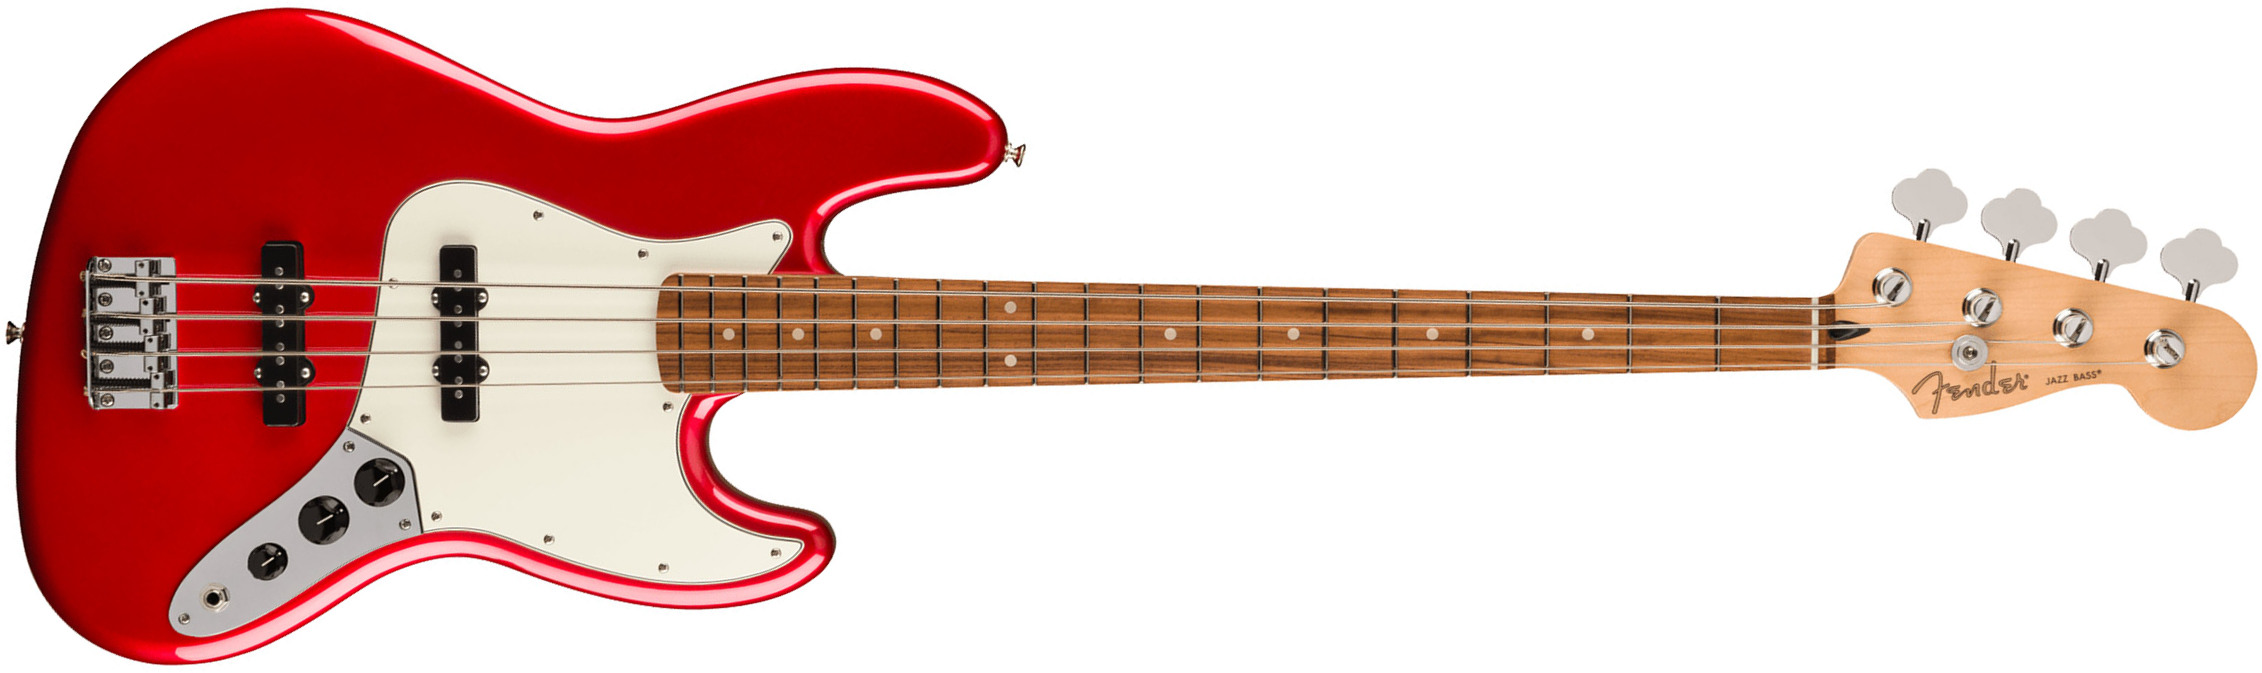 Fender Jazz Bass Player Mex 2023 Pf - Candy Apple Red - Solidbody E-bass - Main picture